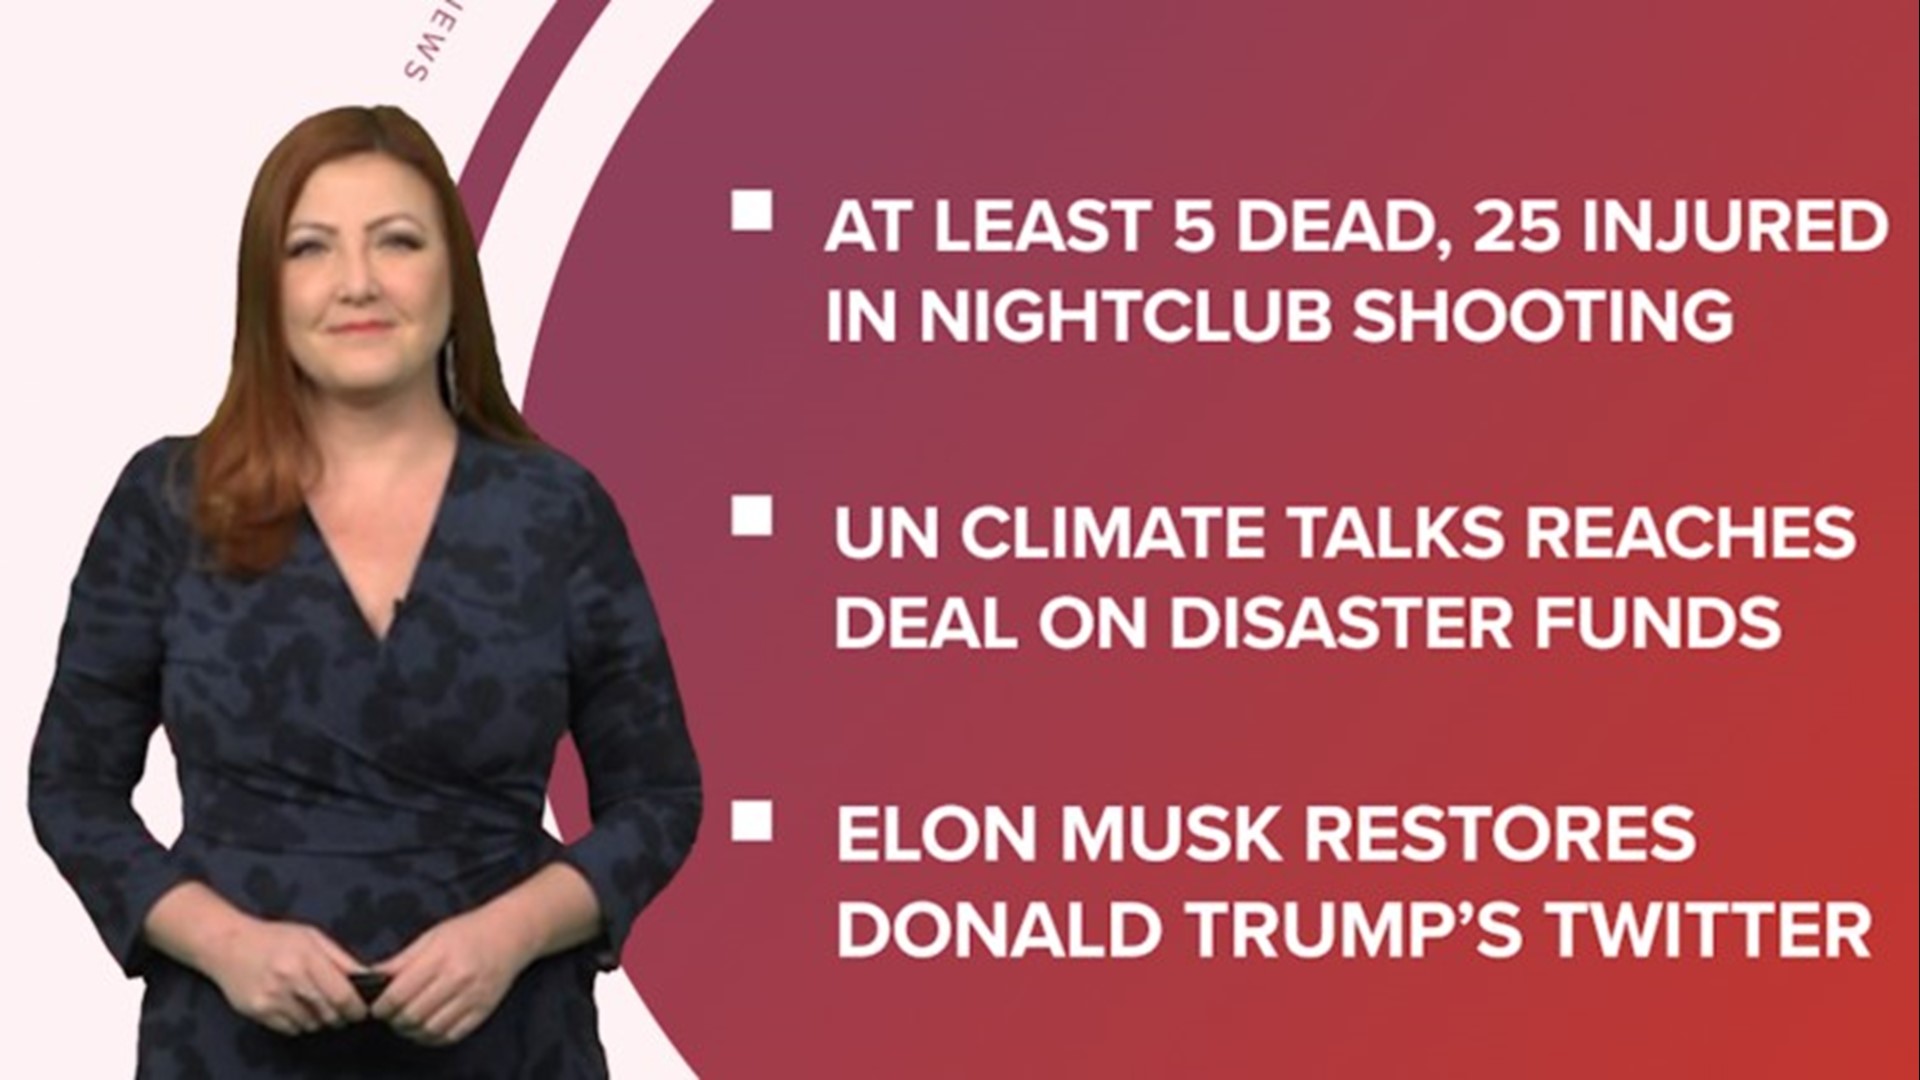 A look at what is happening in the news from an update on the deadly mass shooting in Colorado Springs to UN Climate Summit talks and the 50th American Music Awards.